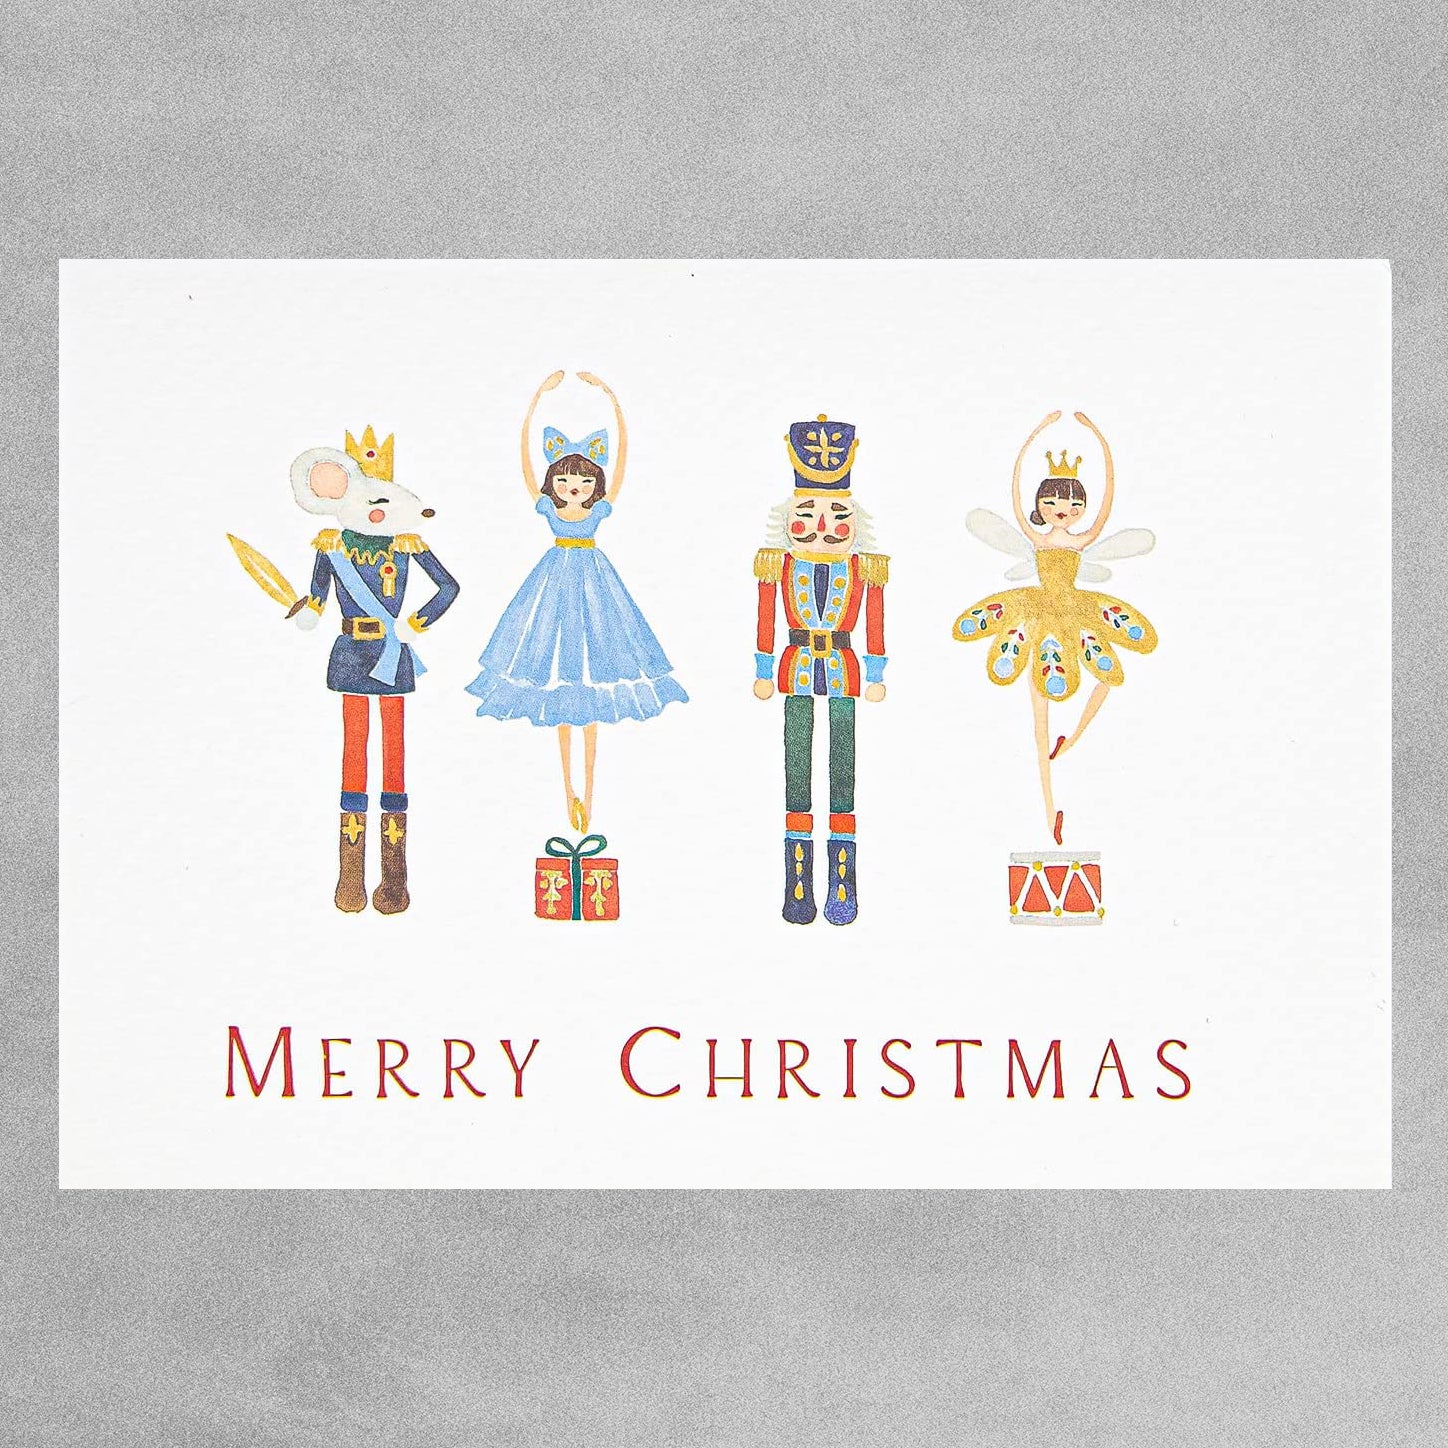 The Doodle Factory Nutcracker Christmas Cards - Pack of 20